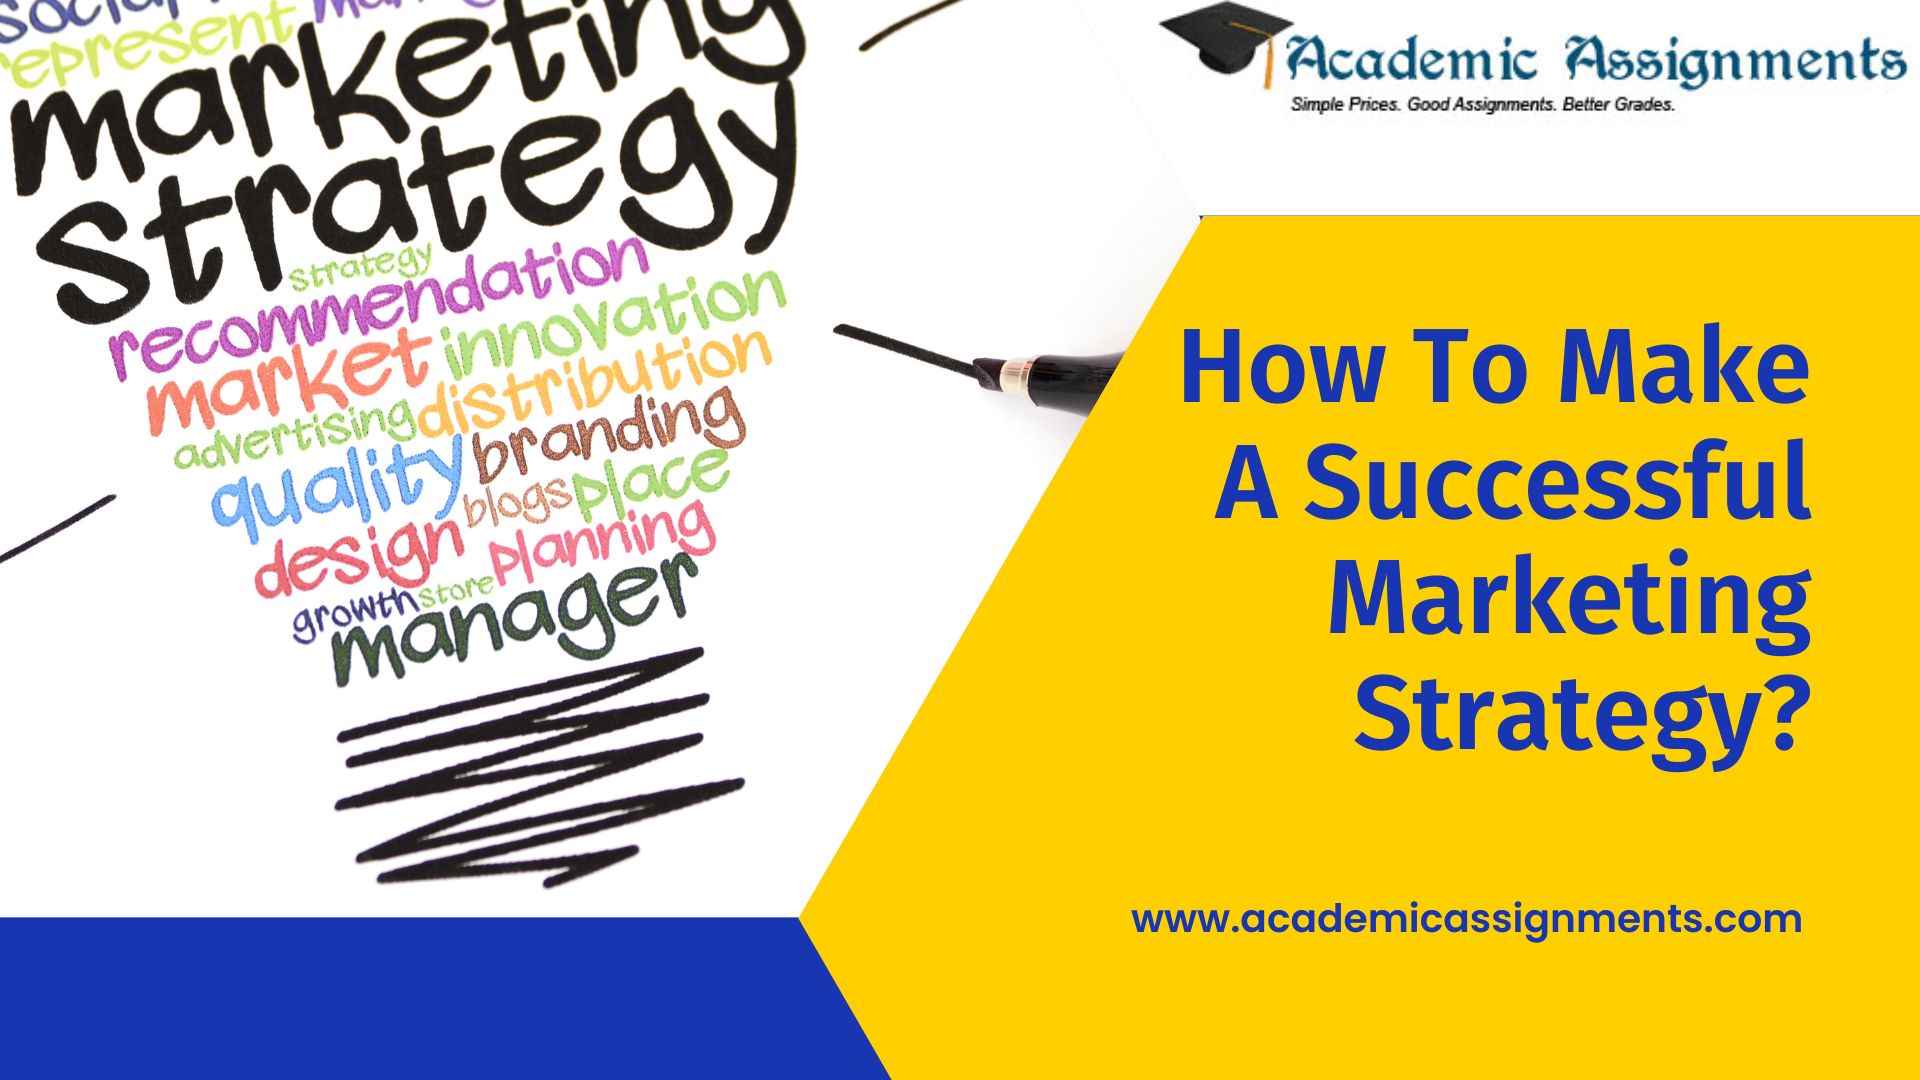 How To Make A Successful Marketing Strategy